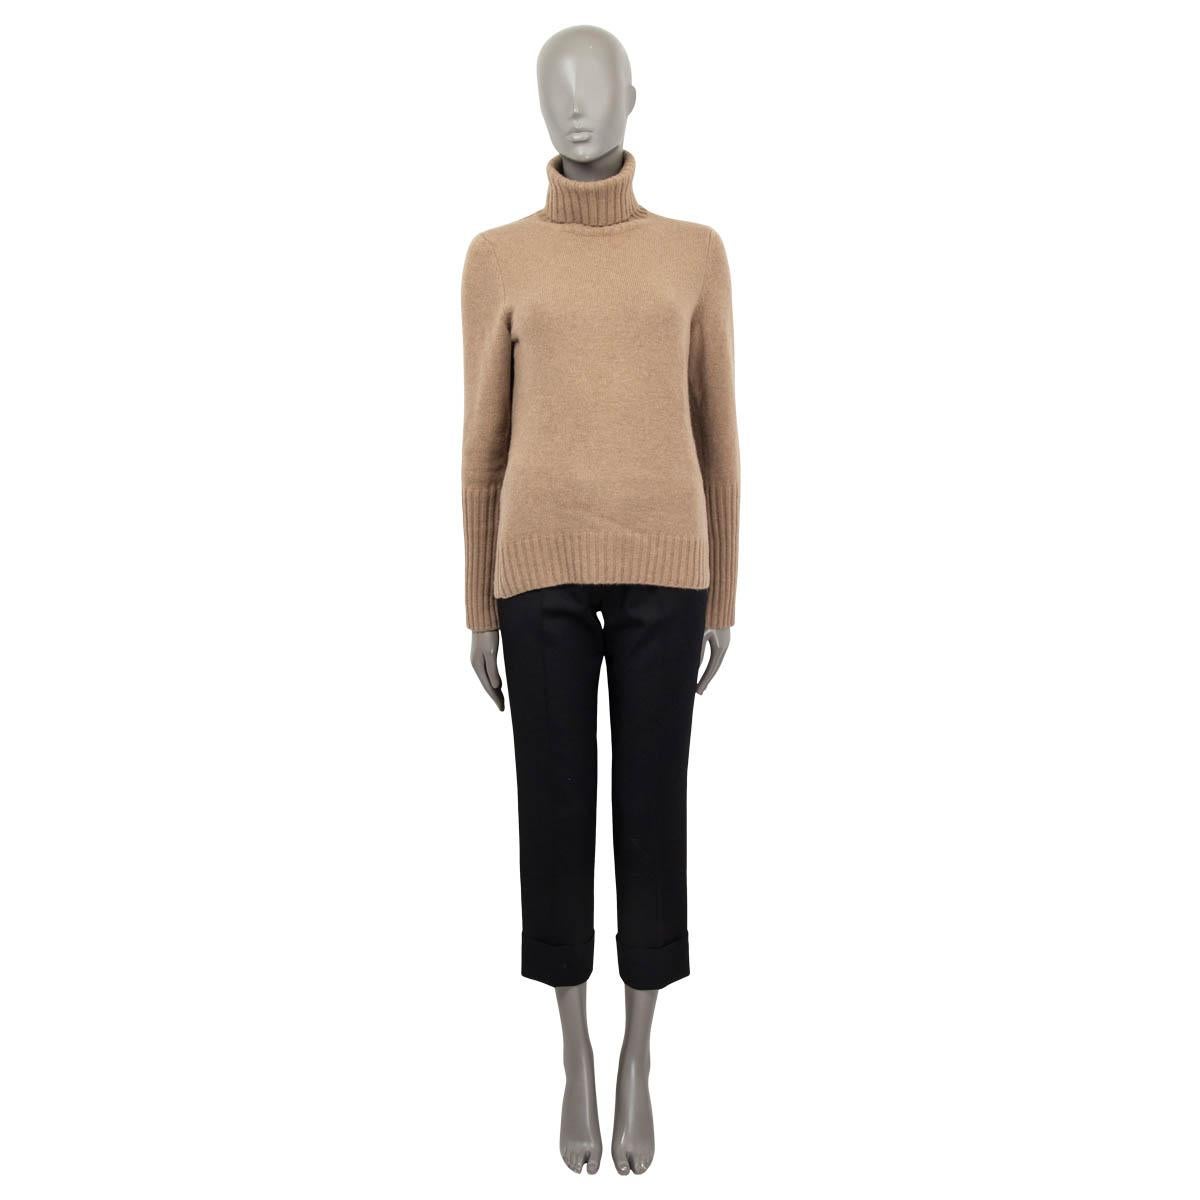 100% authentic Loro Piana turtleneck sweater in beige cashmere (100%). Has been worn and is in excellent condition.

Measurements
Tag Size	42
Size	M
Shoulder Width	38cm (14.8in)
Bust From	98cm (38.2in)
Waist From	94cm (36.7in)
Length	61cm